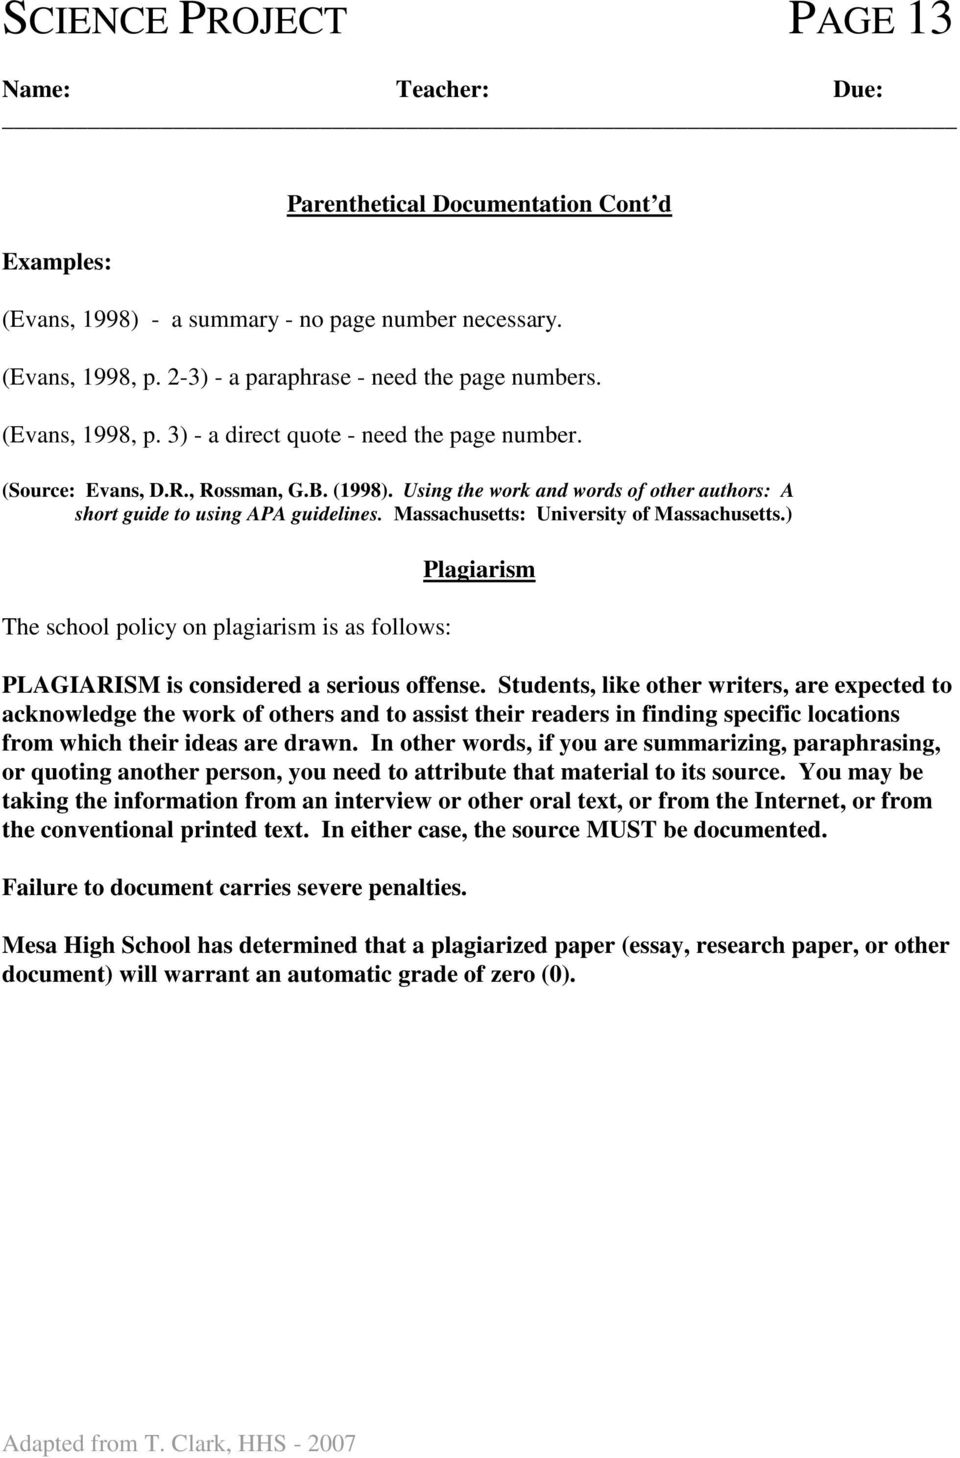 Massachusetts: University of Massachusetts.) The school policy on plagiarism is as follows: Plagiarism PLAGIARISM is considered a serious offense.